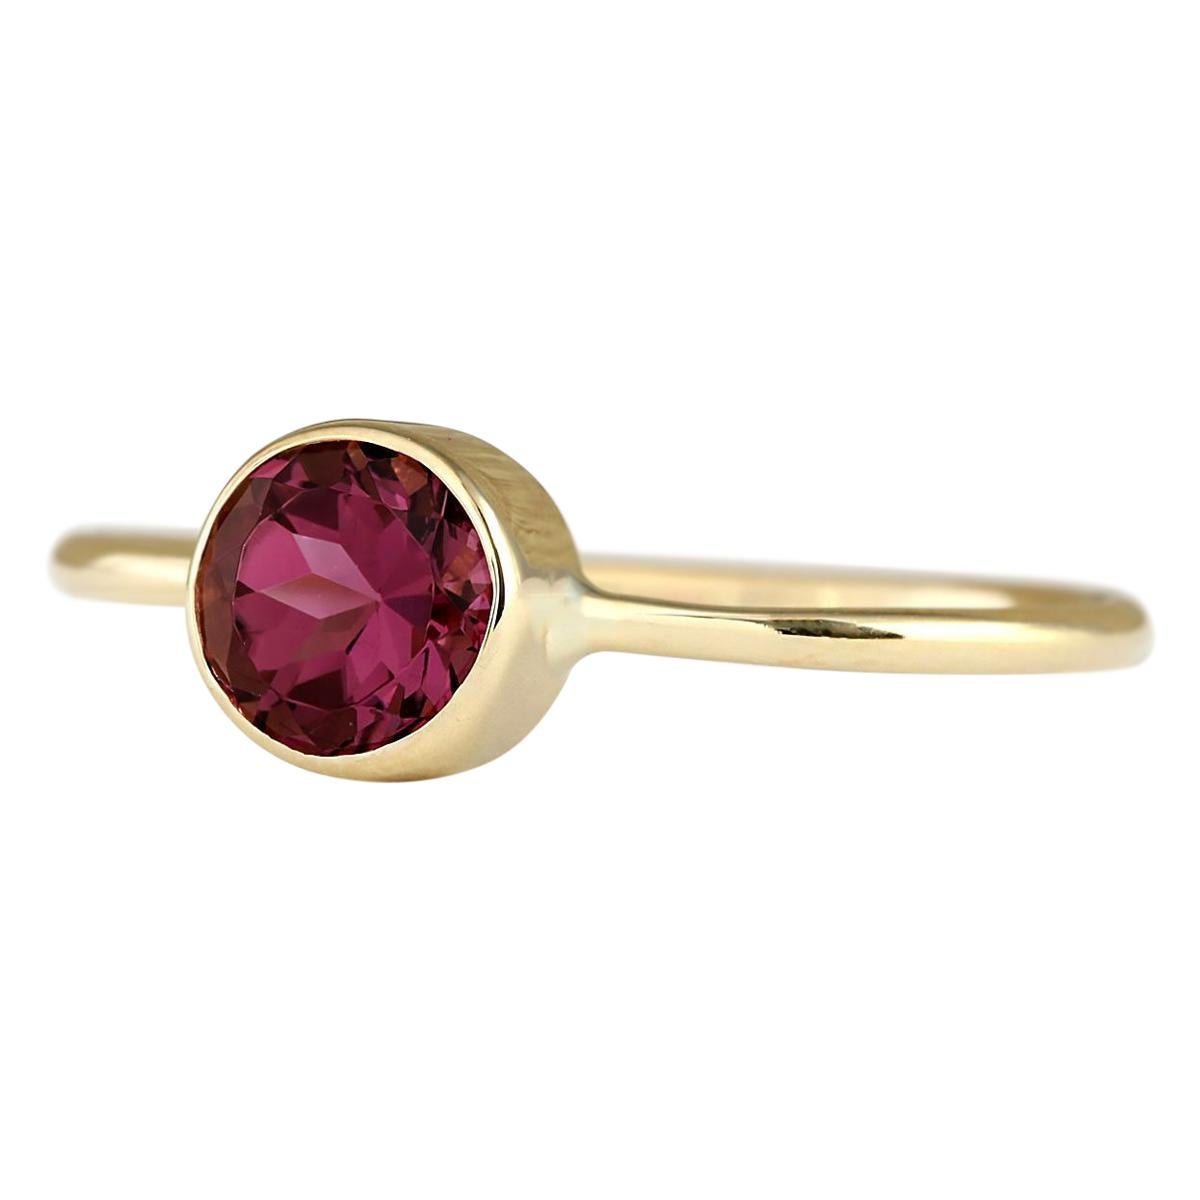 Stamped: 14K Yellow Gold
Total Ring Weight: 1.6 Grams
Total Natural Tourmaline Weight is 0.80 Carat
Color: Pink
Face Measures: 6.00x6.00 mm
Sku: [703409W]